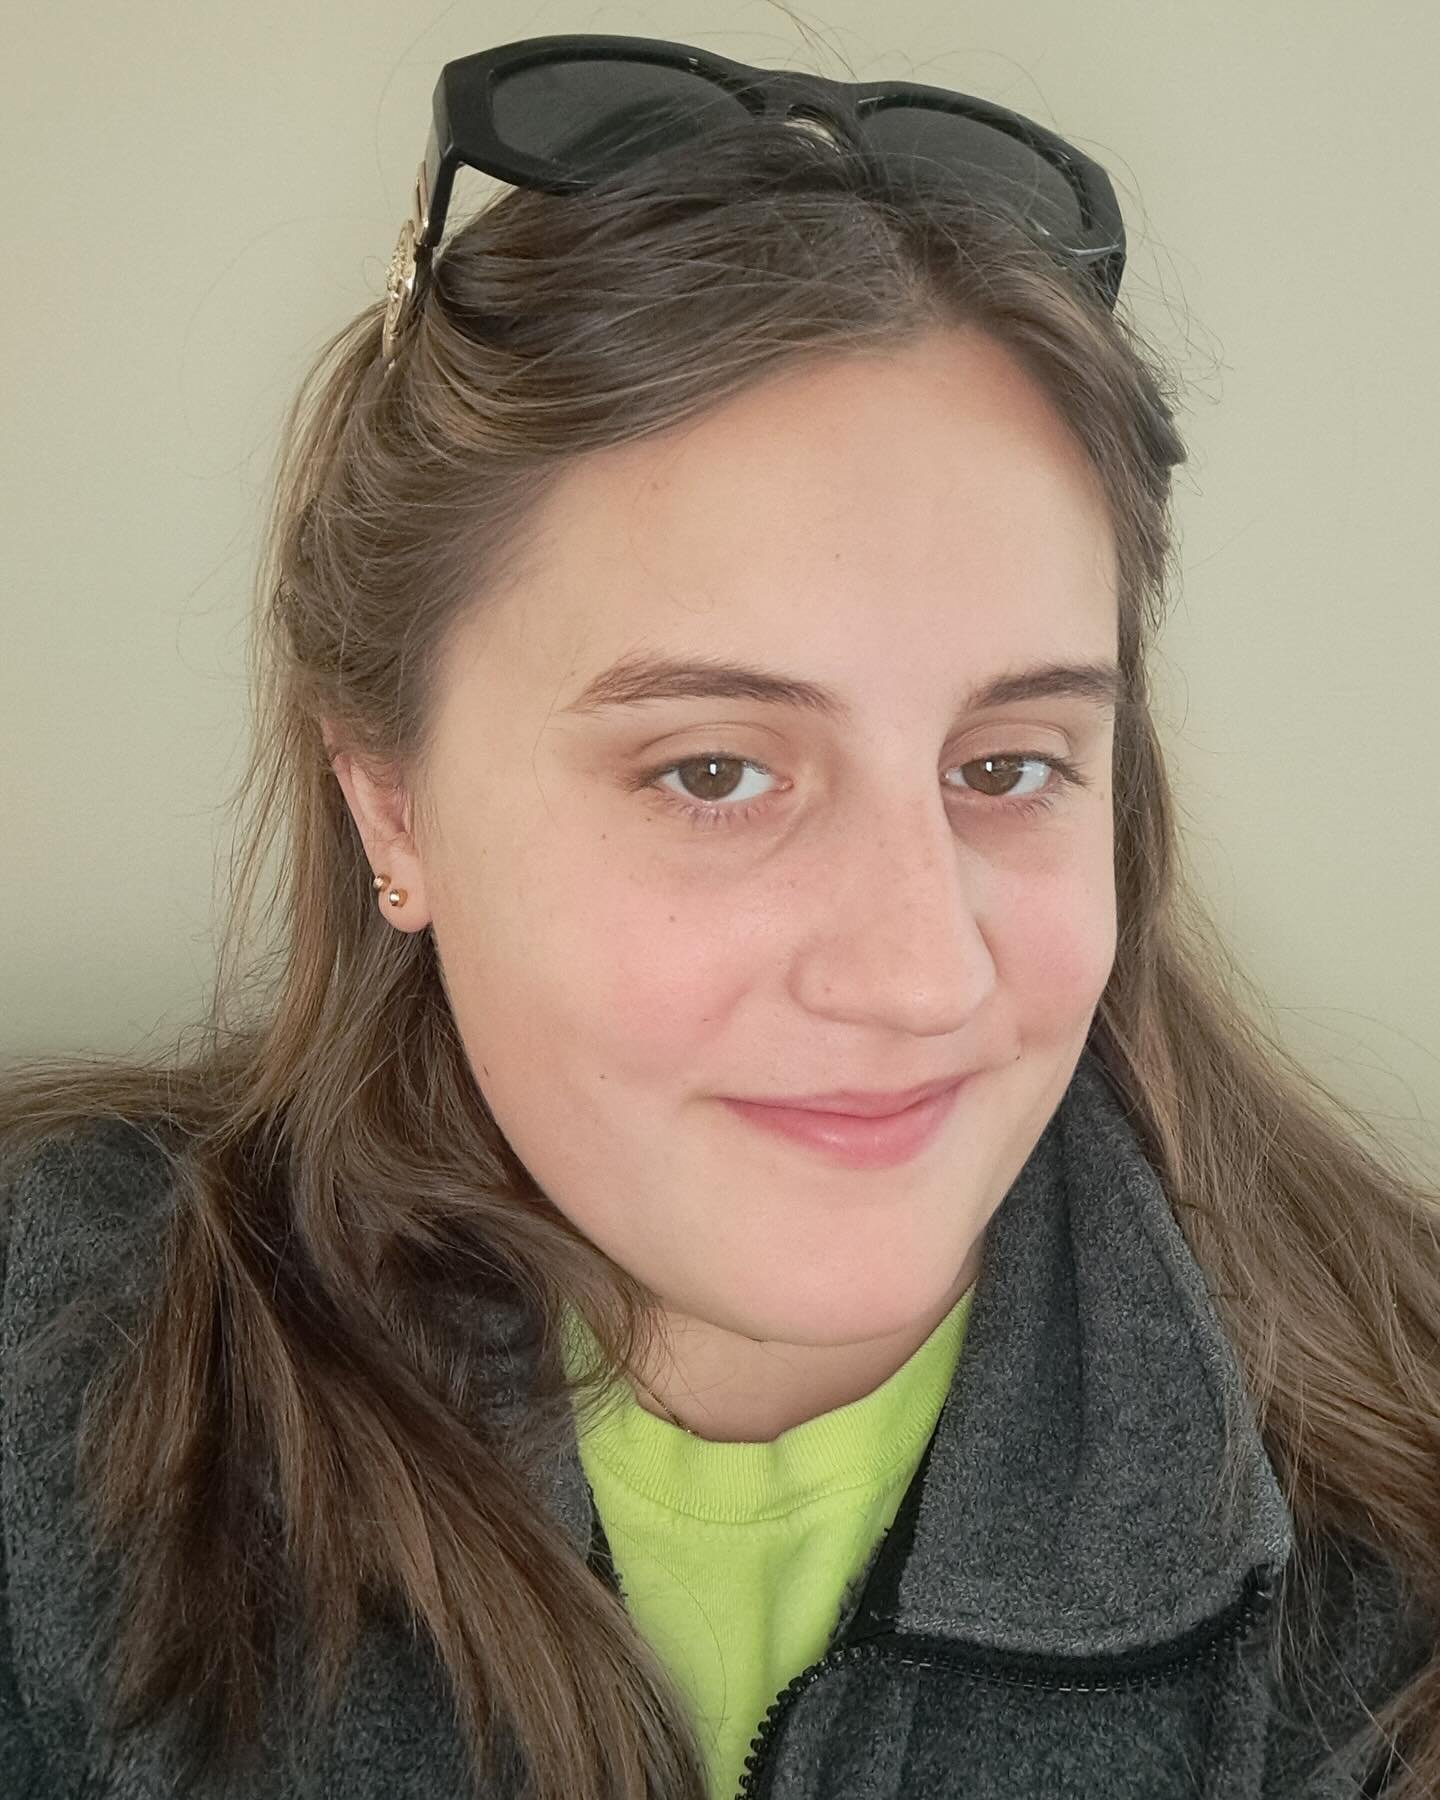 Meet the panelist: Eva is an 18 year old girl from Ridgefield. &ldquo;I transitioned at age 6. I love playing tennis and being active. I like hanging out with my friends by walking in town, going to the mall, and going to the beach. I am currently a 